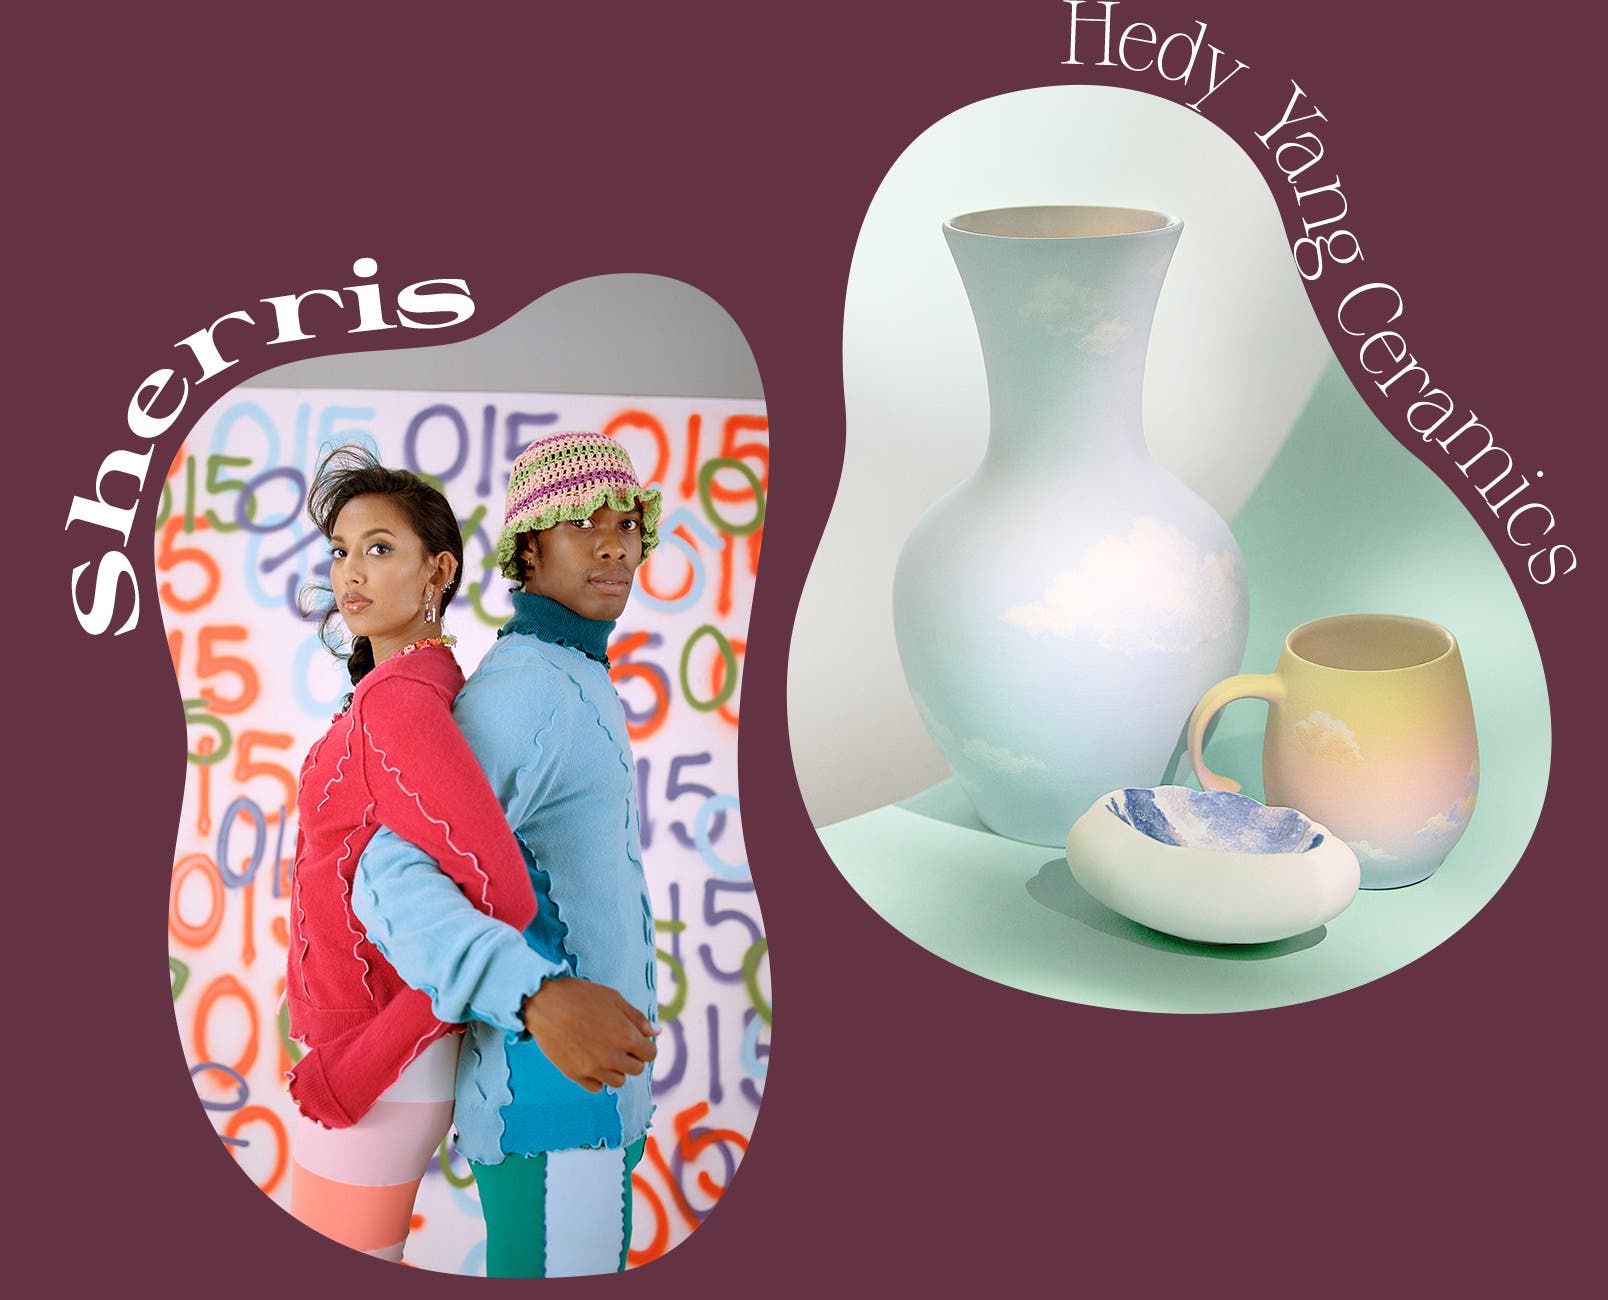 A woman and man wearing clothing from Sherris. A vase, dish and mug from Hedy Yang Ceramics.